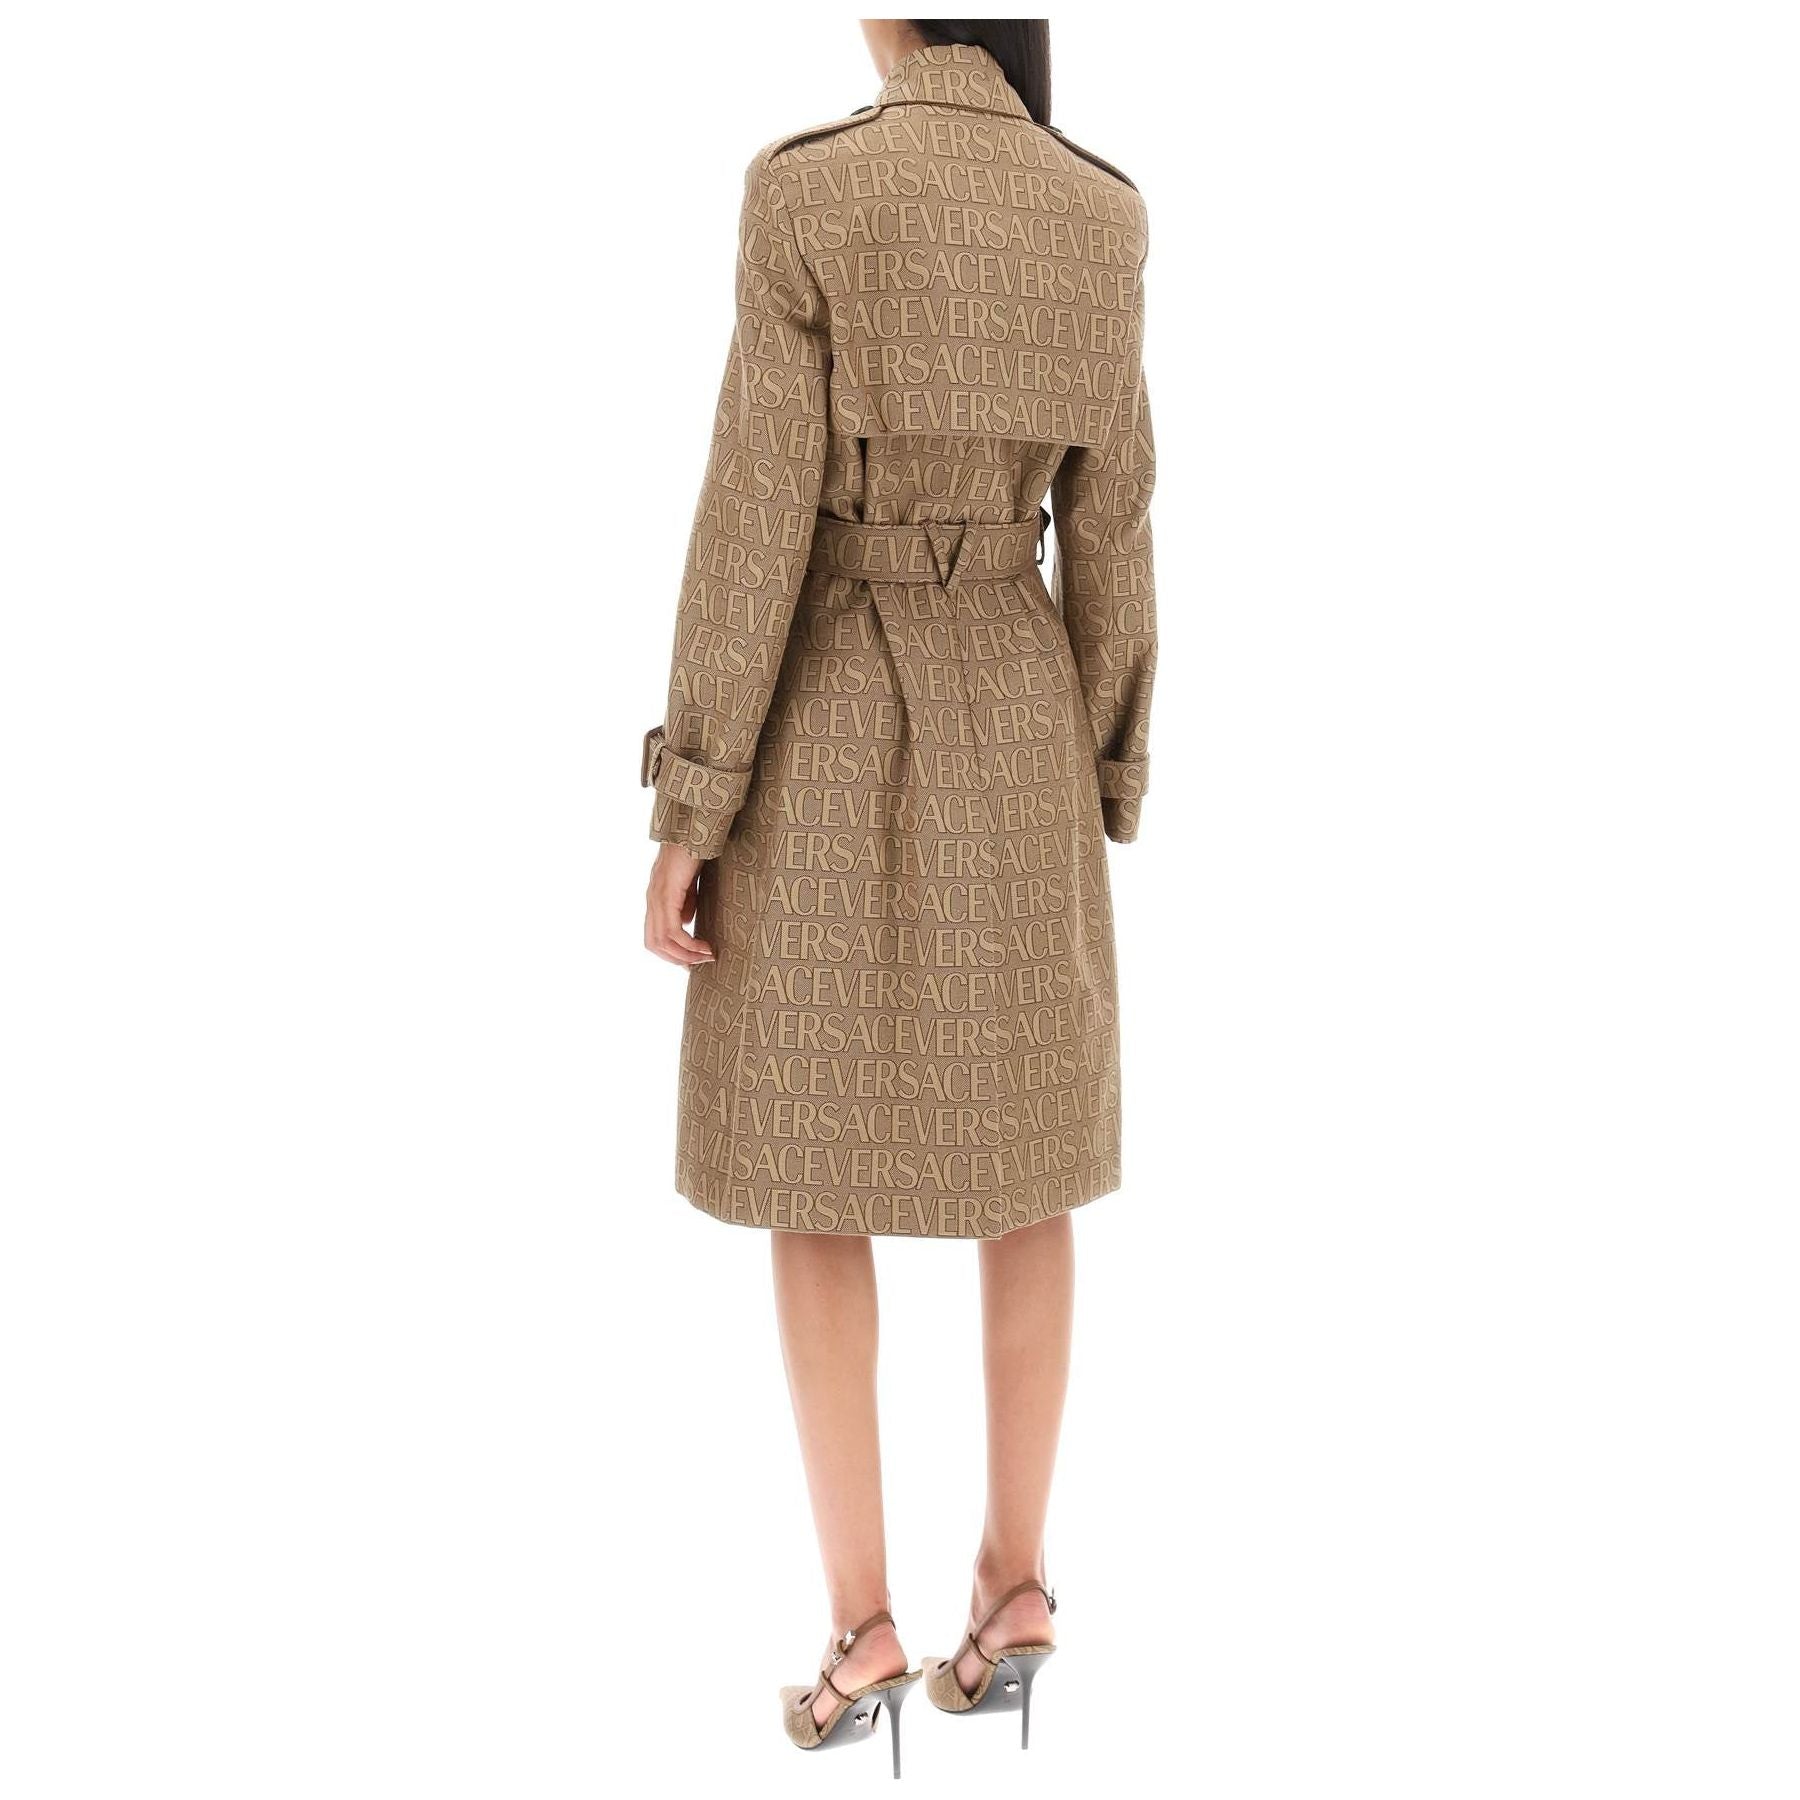 'Versace Allover' Double Breasted Trench Coat